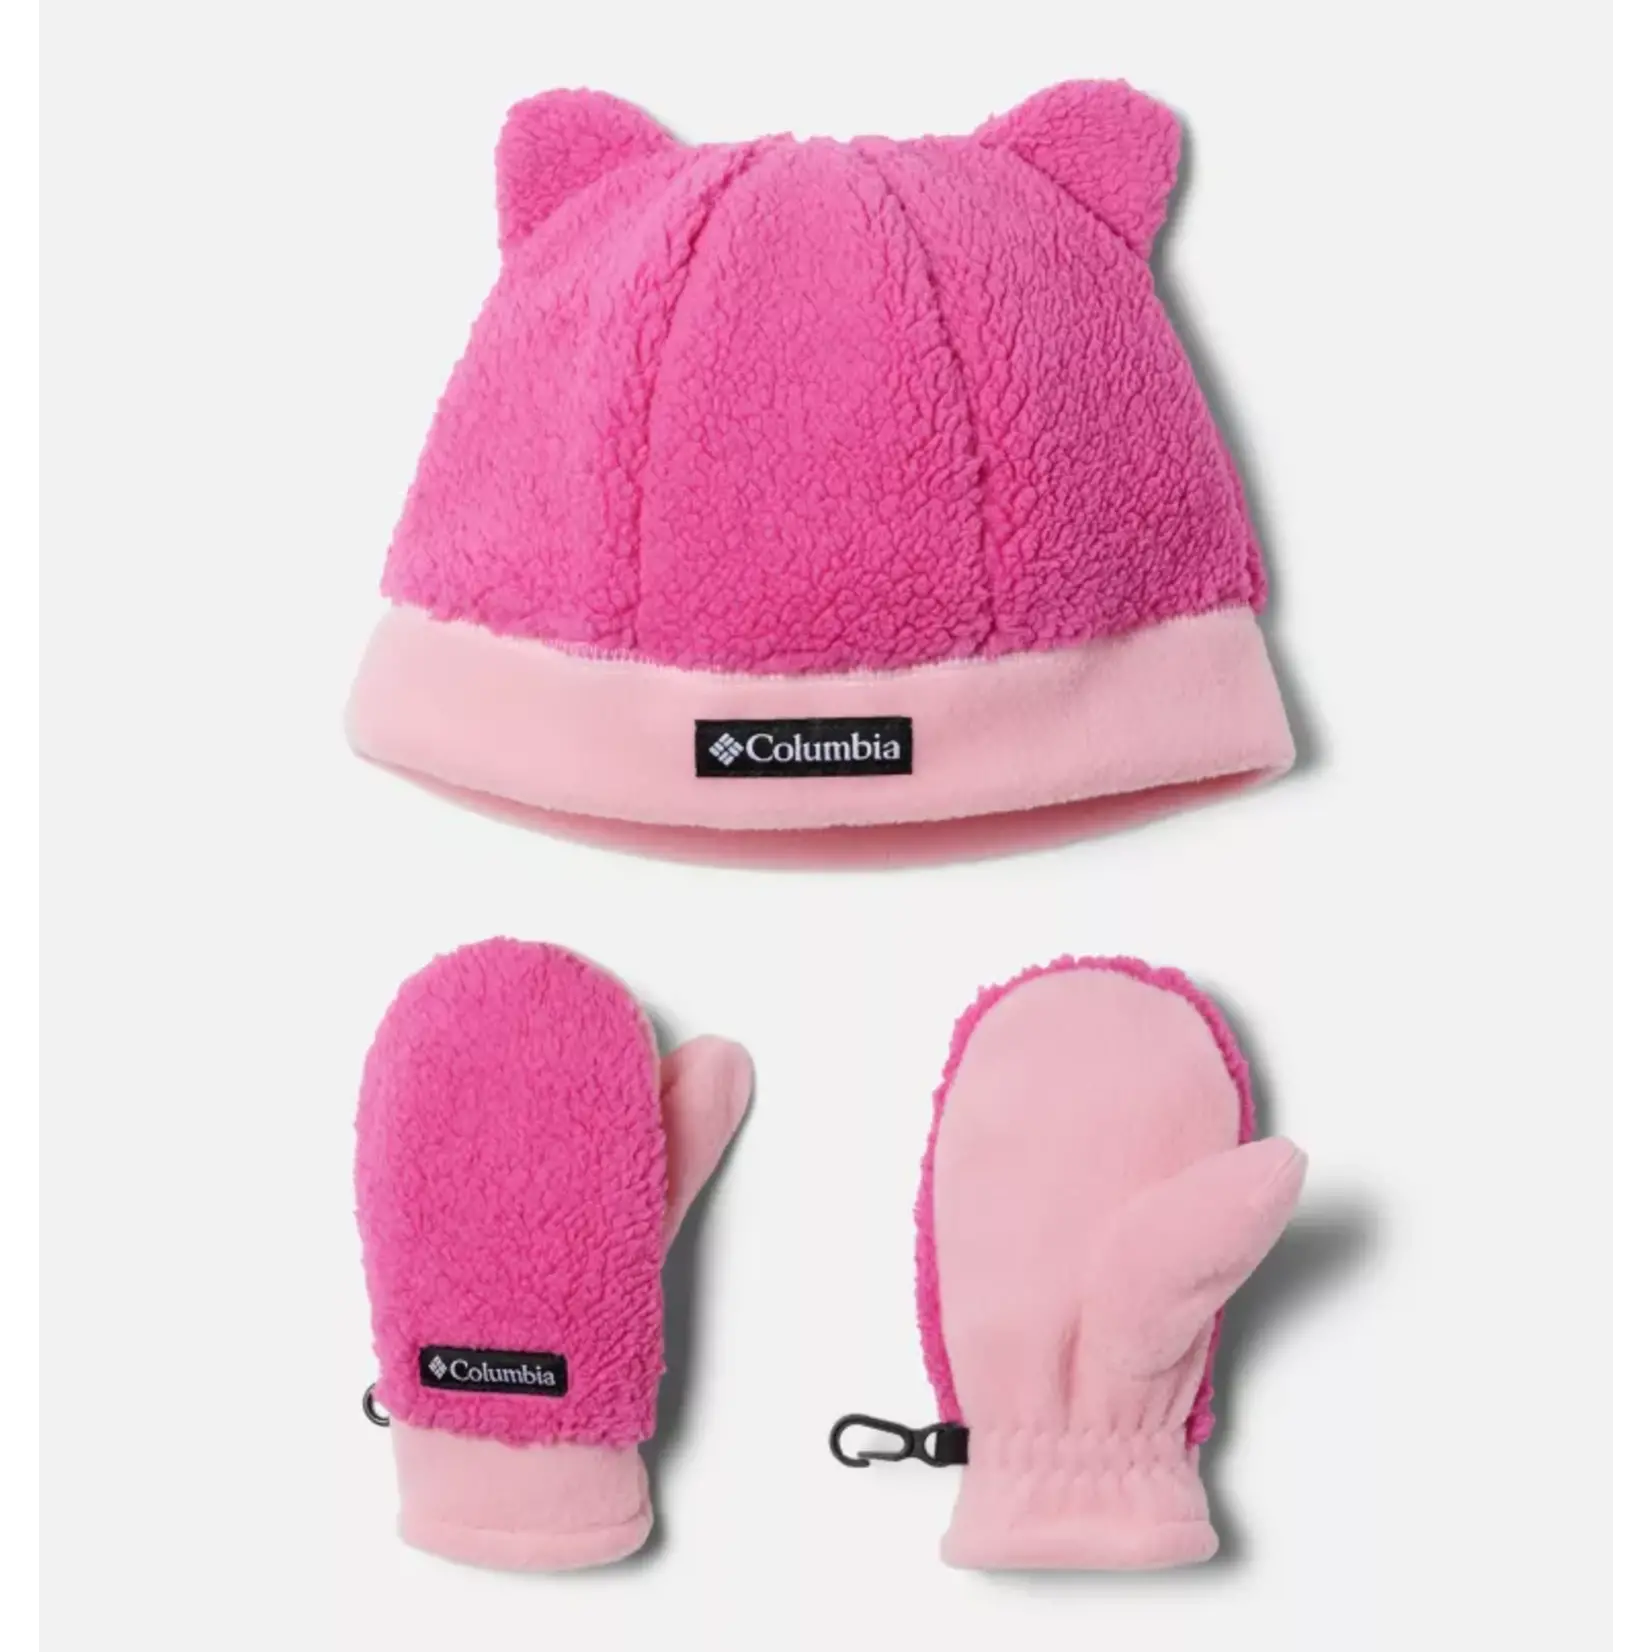 Columbia Toddler rugged ridge, beanie and mitten - pink ice, pink orchid